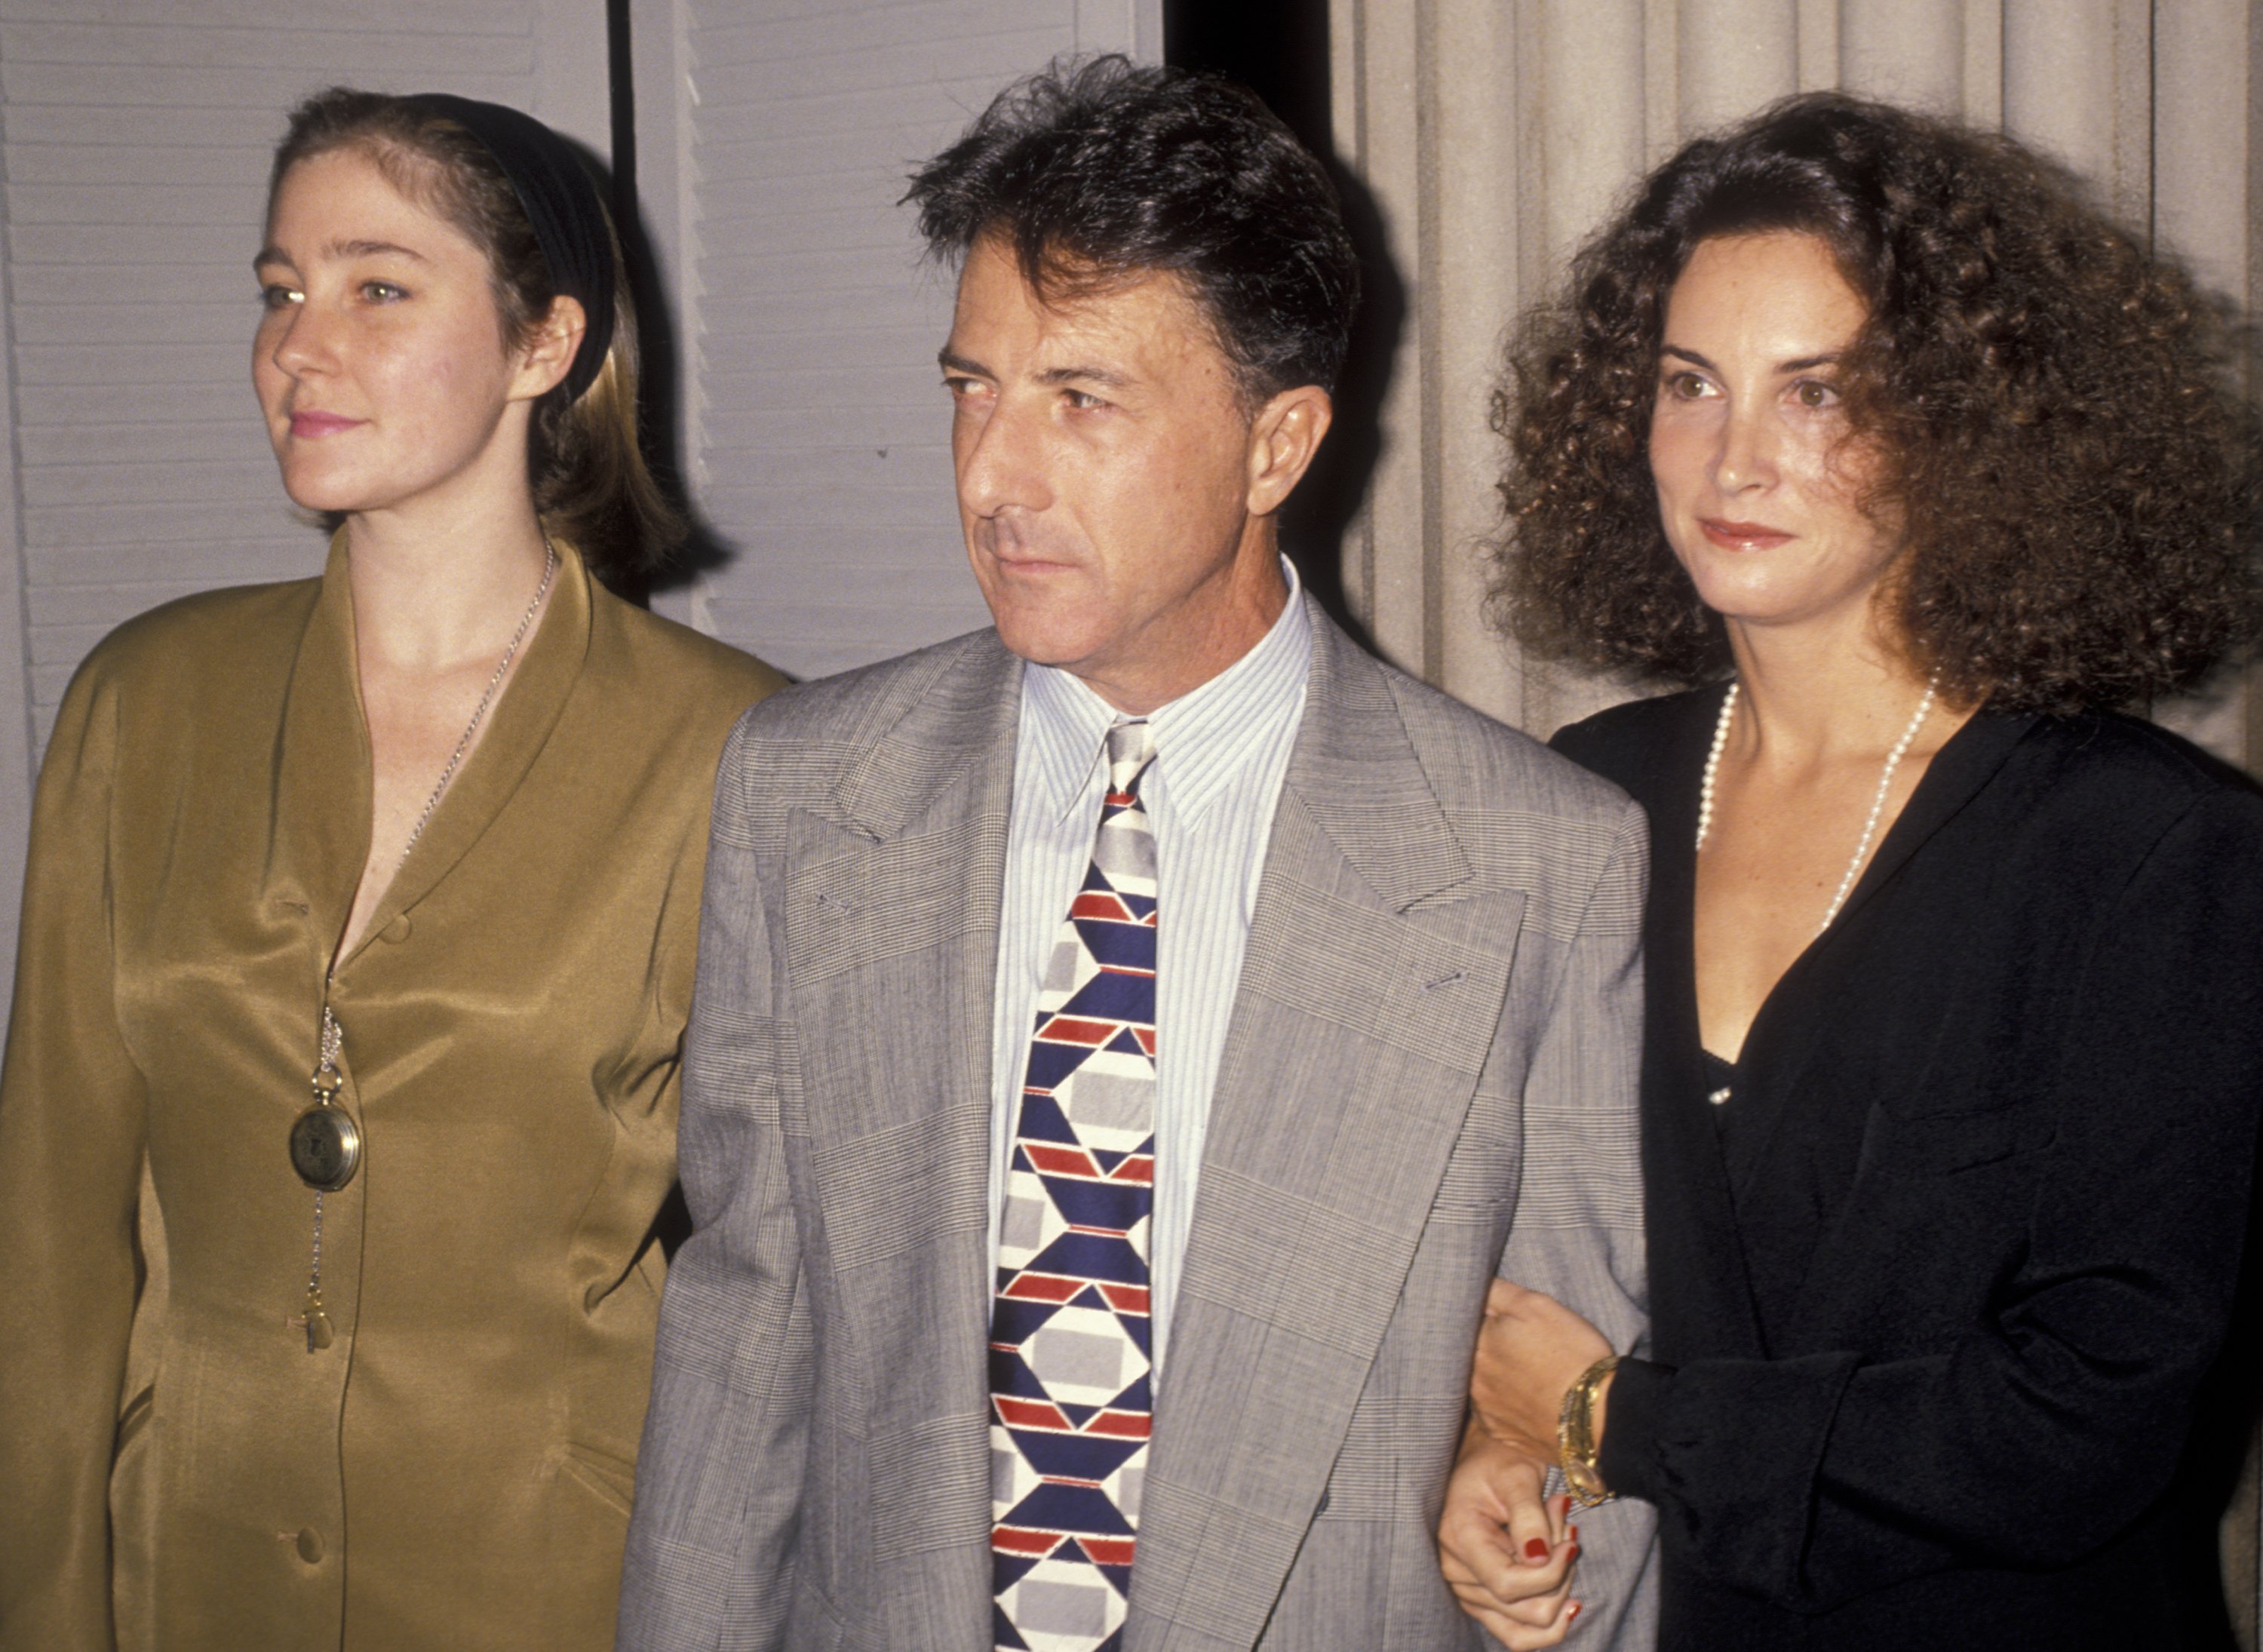 Dustin Hoffman, wife Lisa Hoffman and daughter Karina Hoffman attend the premiere of "Avalon" on September 27, 1990 at the Metropolitan Museum of Art in New York City | Source: Getty Images